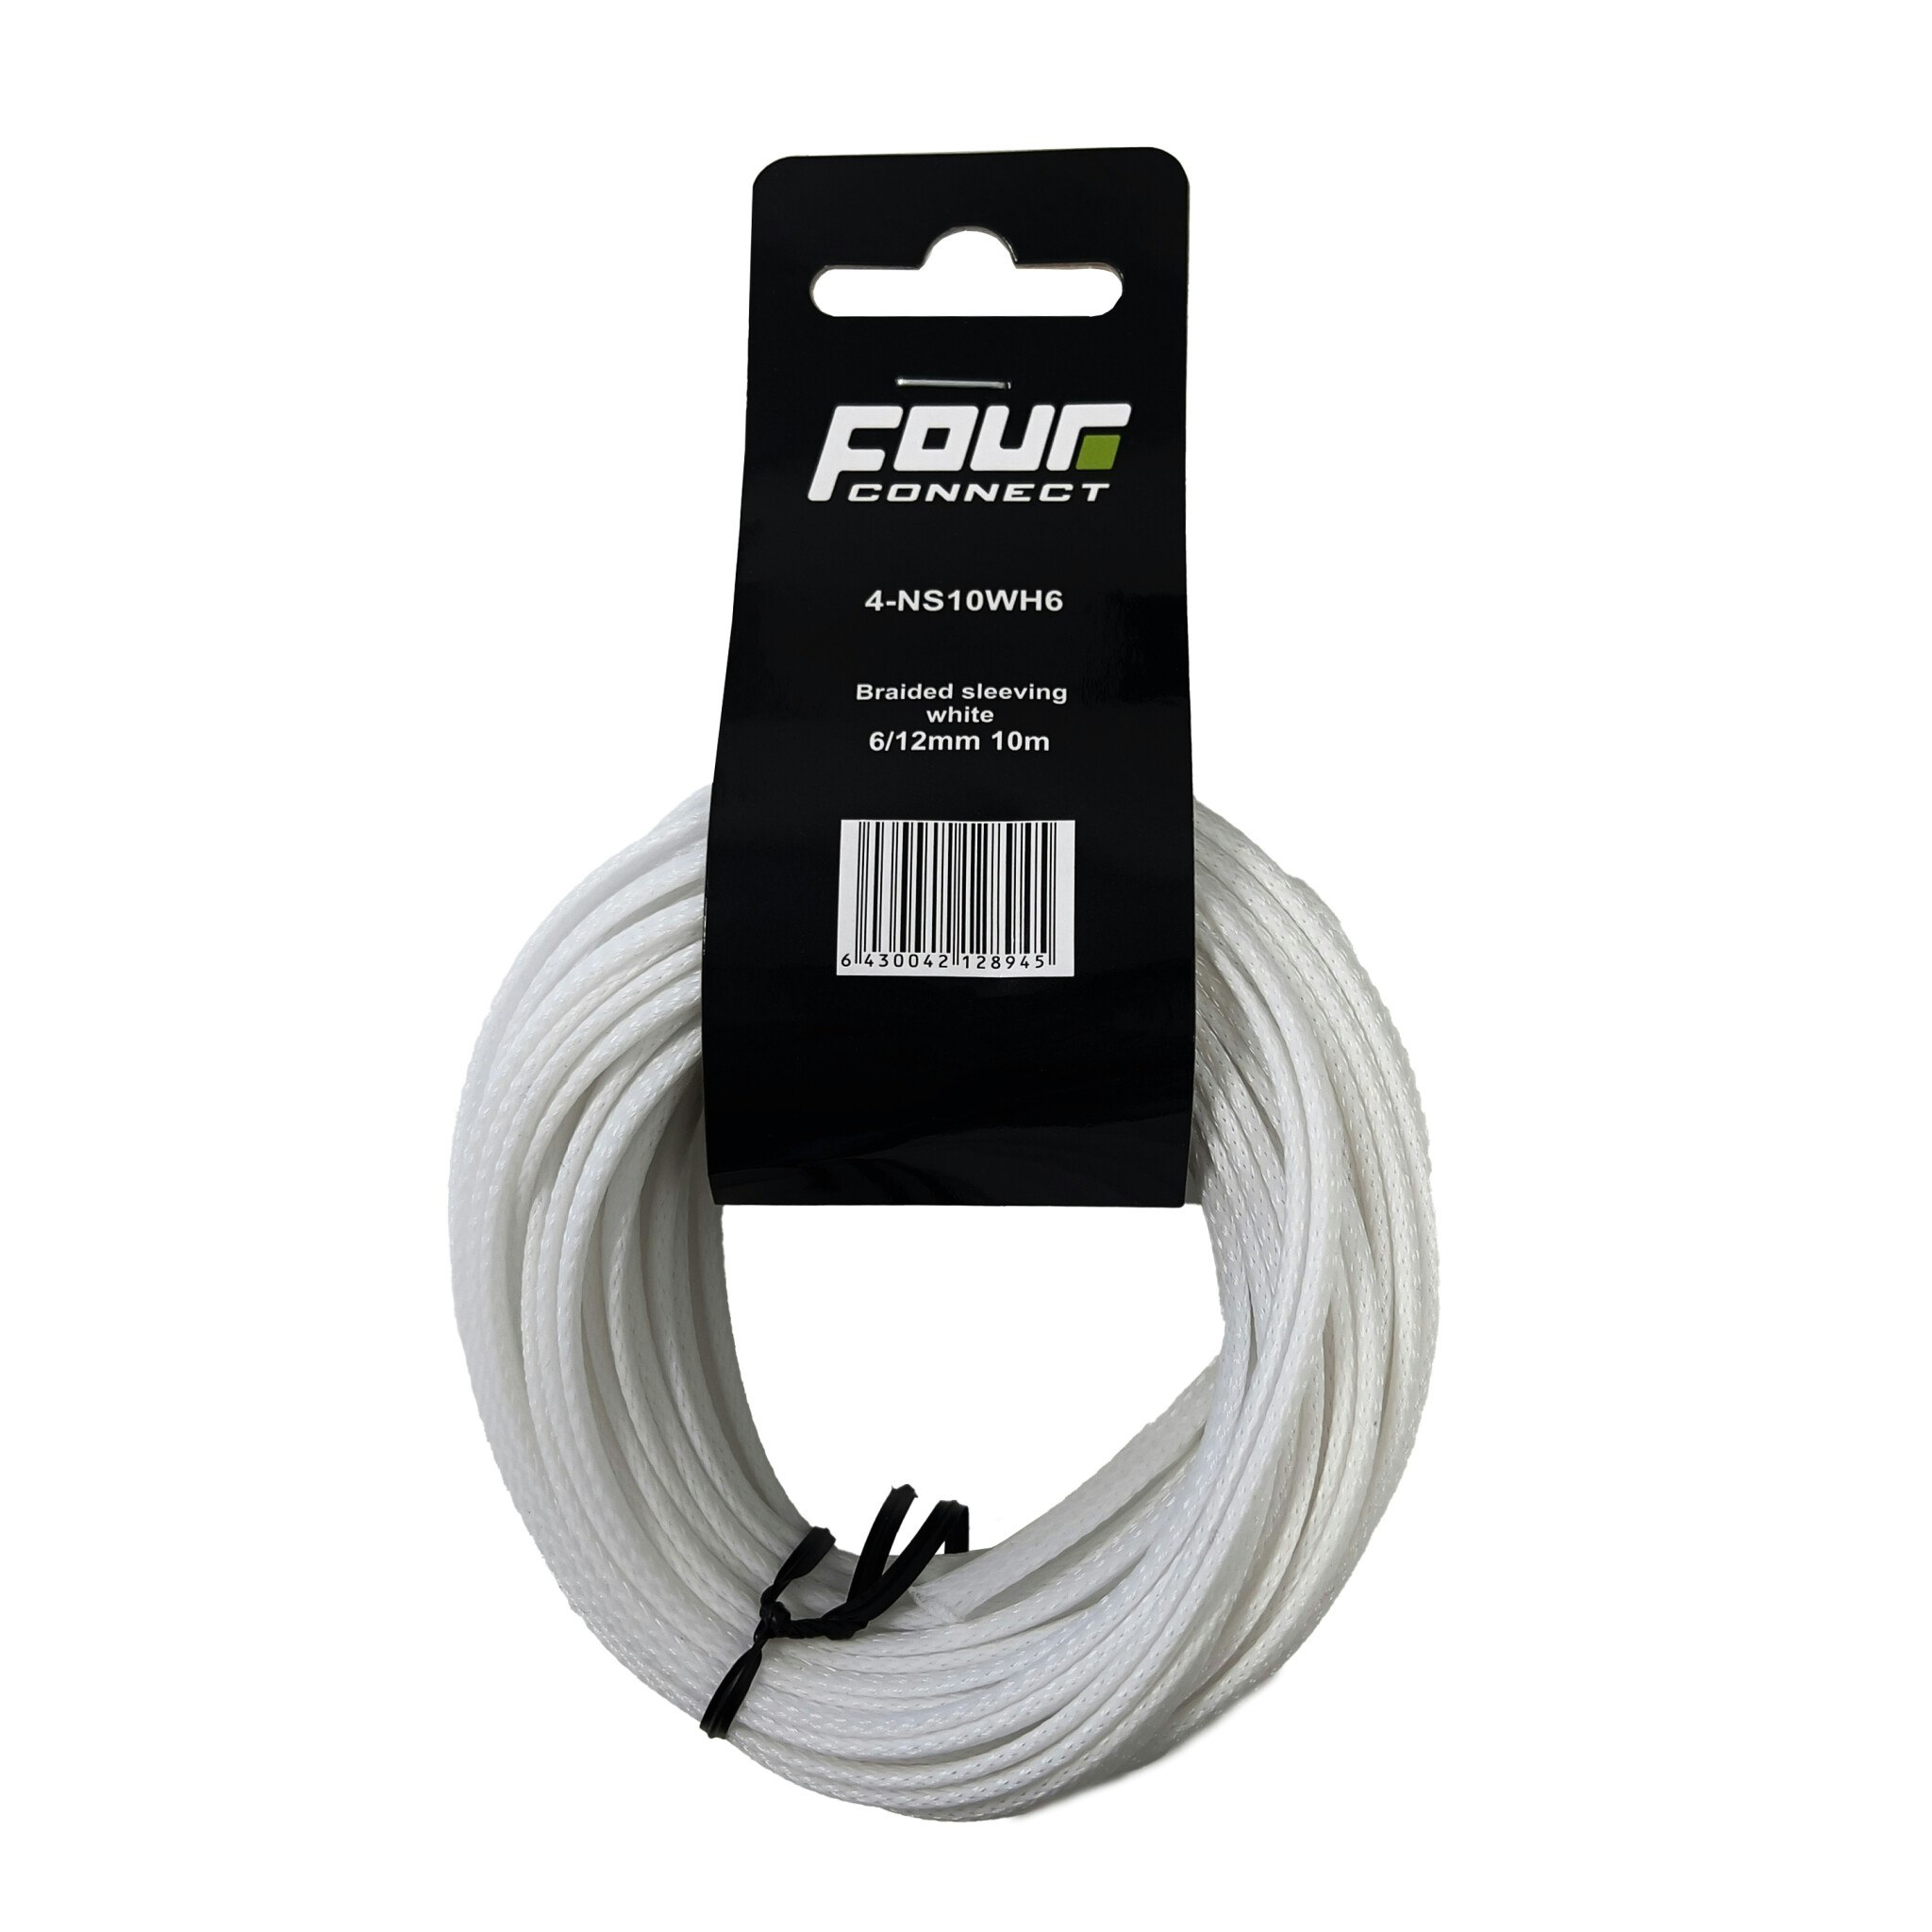 FOUR Connect 4-NS10WH6 Nylonsock White 6/12mm 10m